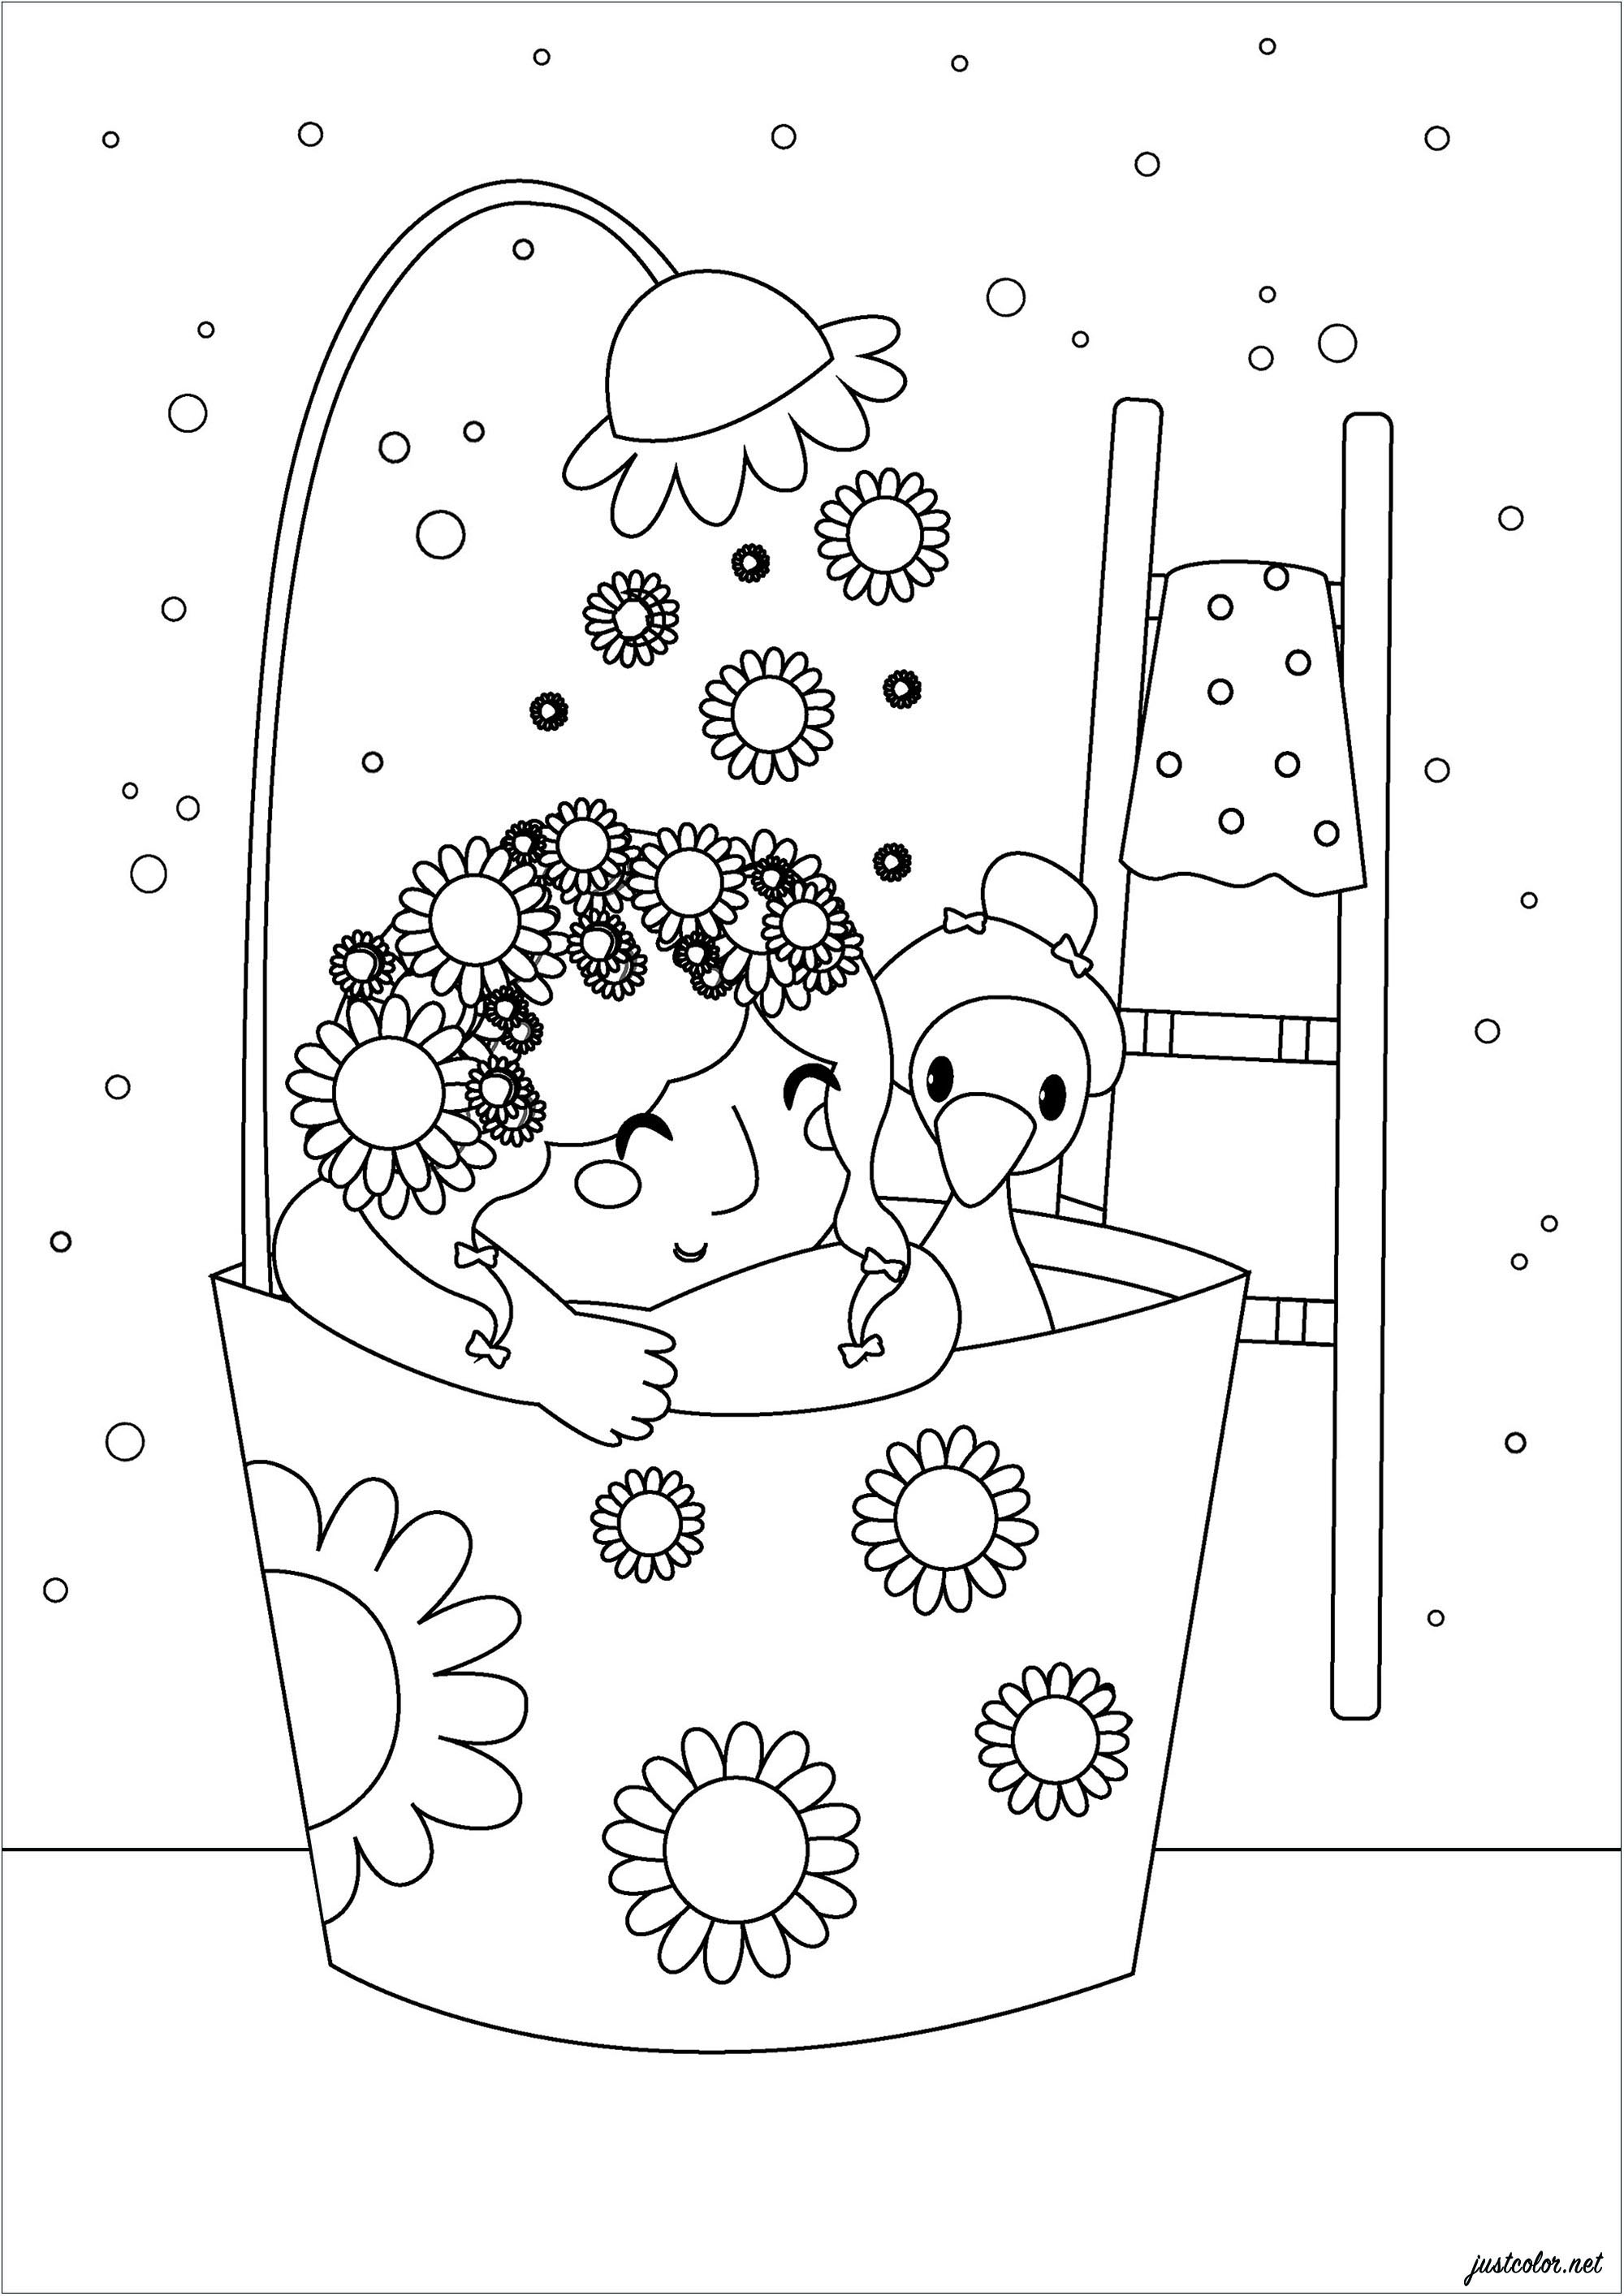 A funny bath whose shower is a flower ... A very Zen moment awaits you with this pretty coloring book